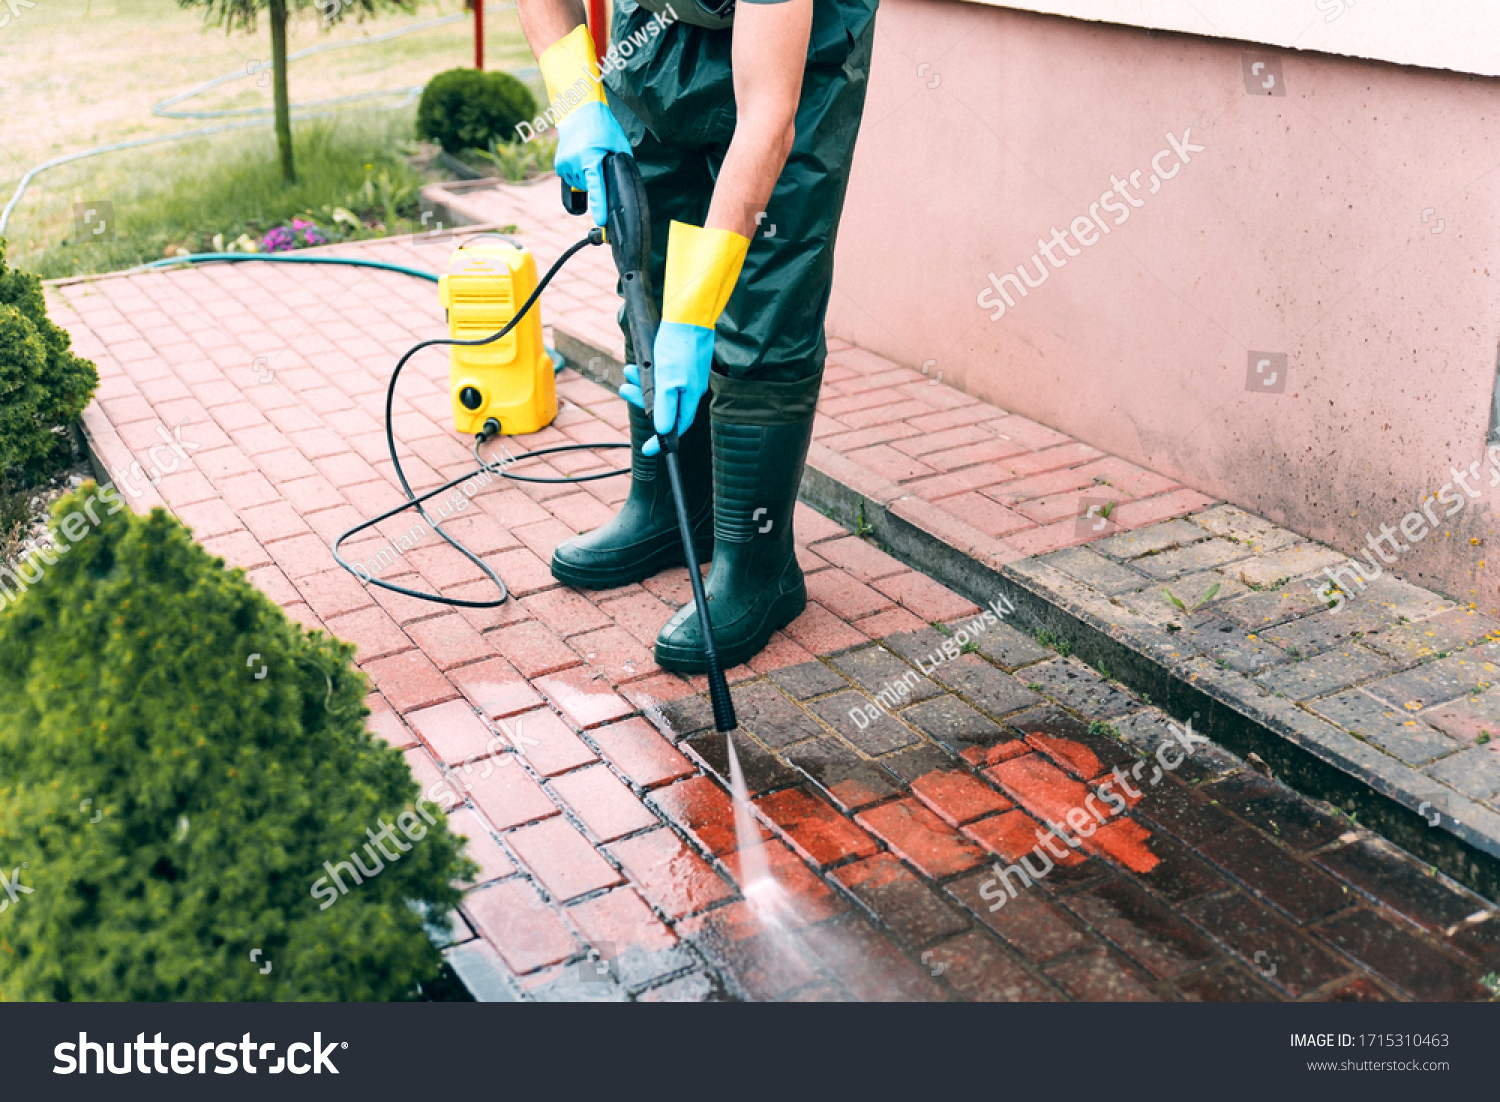 Man cleaning red concrete pavement blocks using high pressure water cleaner. Paving cleaning concept. Man wearing waders, protective waterproof trousers, doing spring jobs in garden. #1715310463